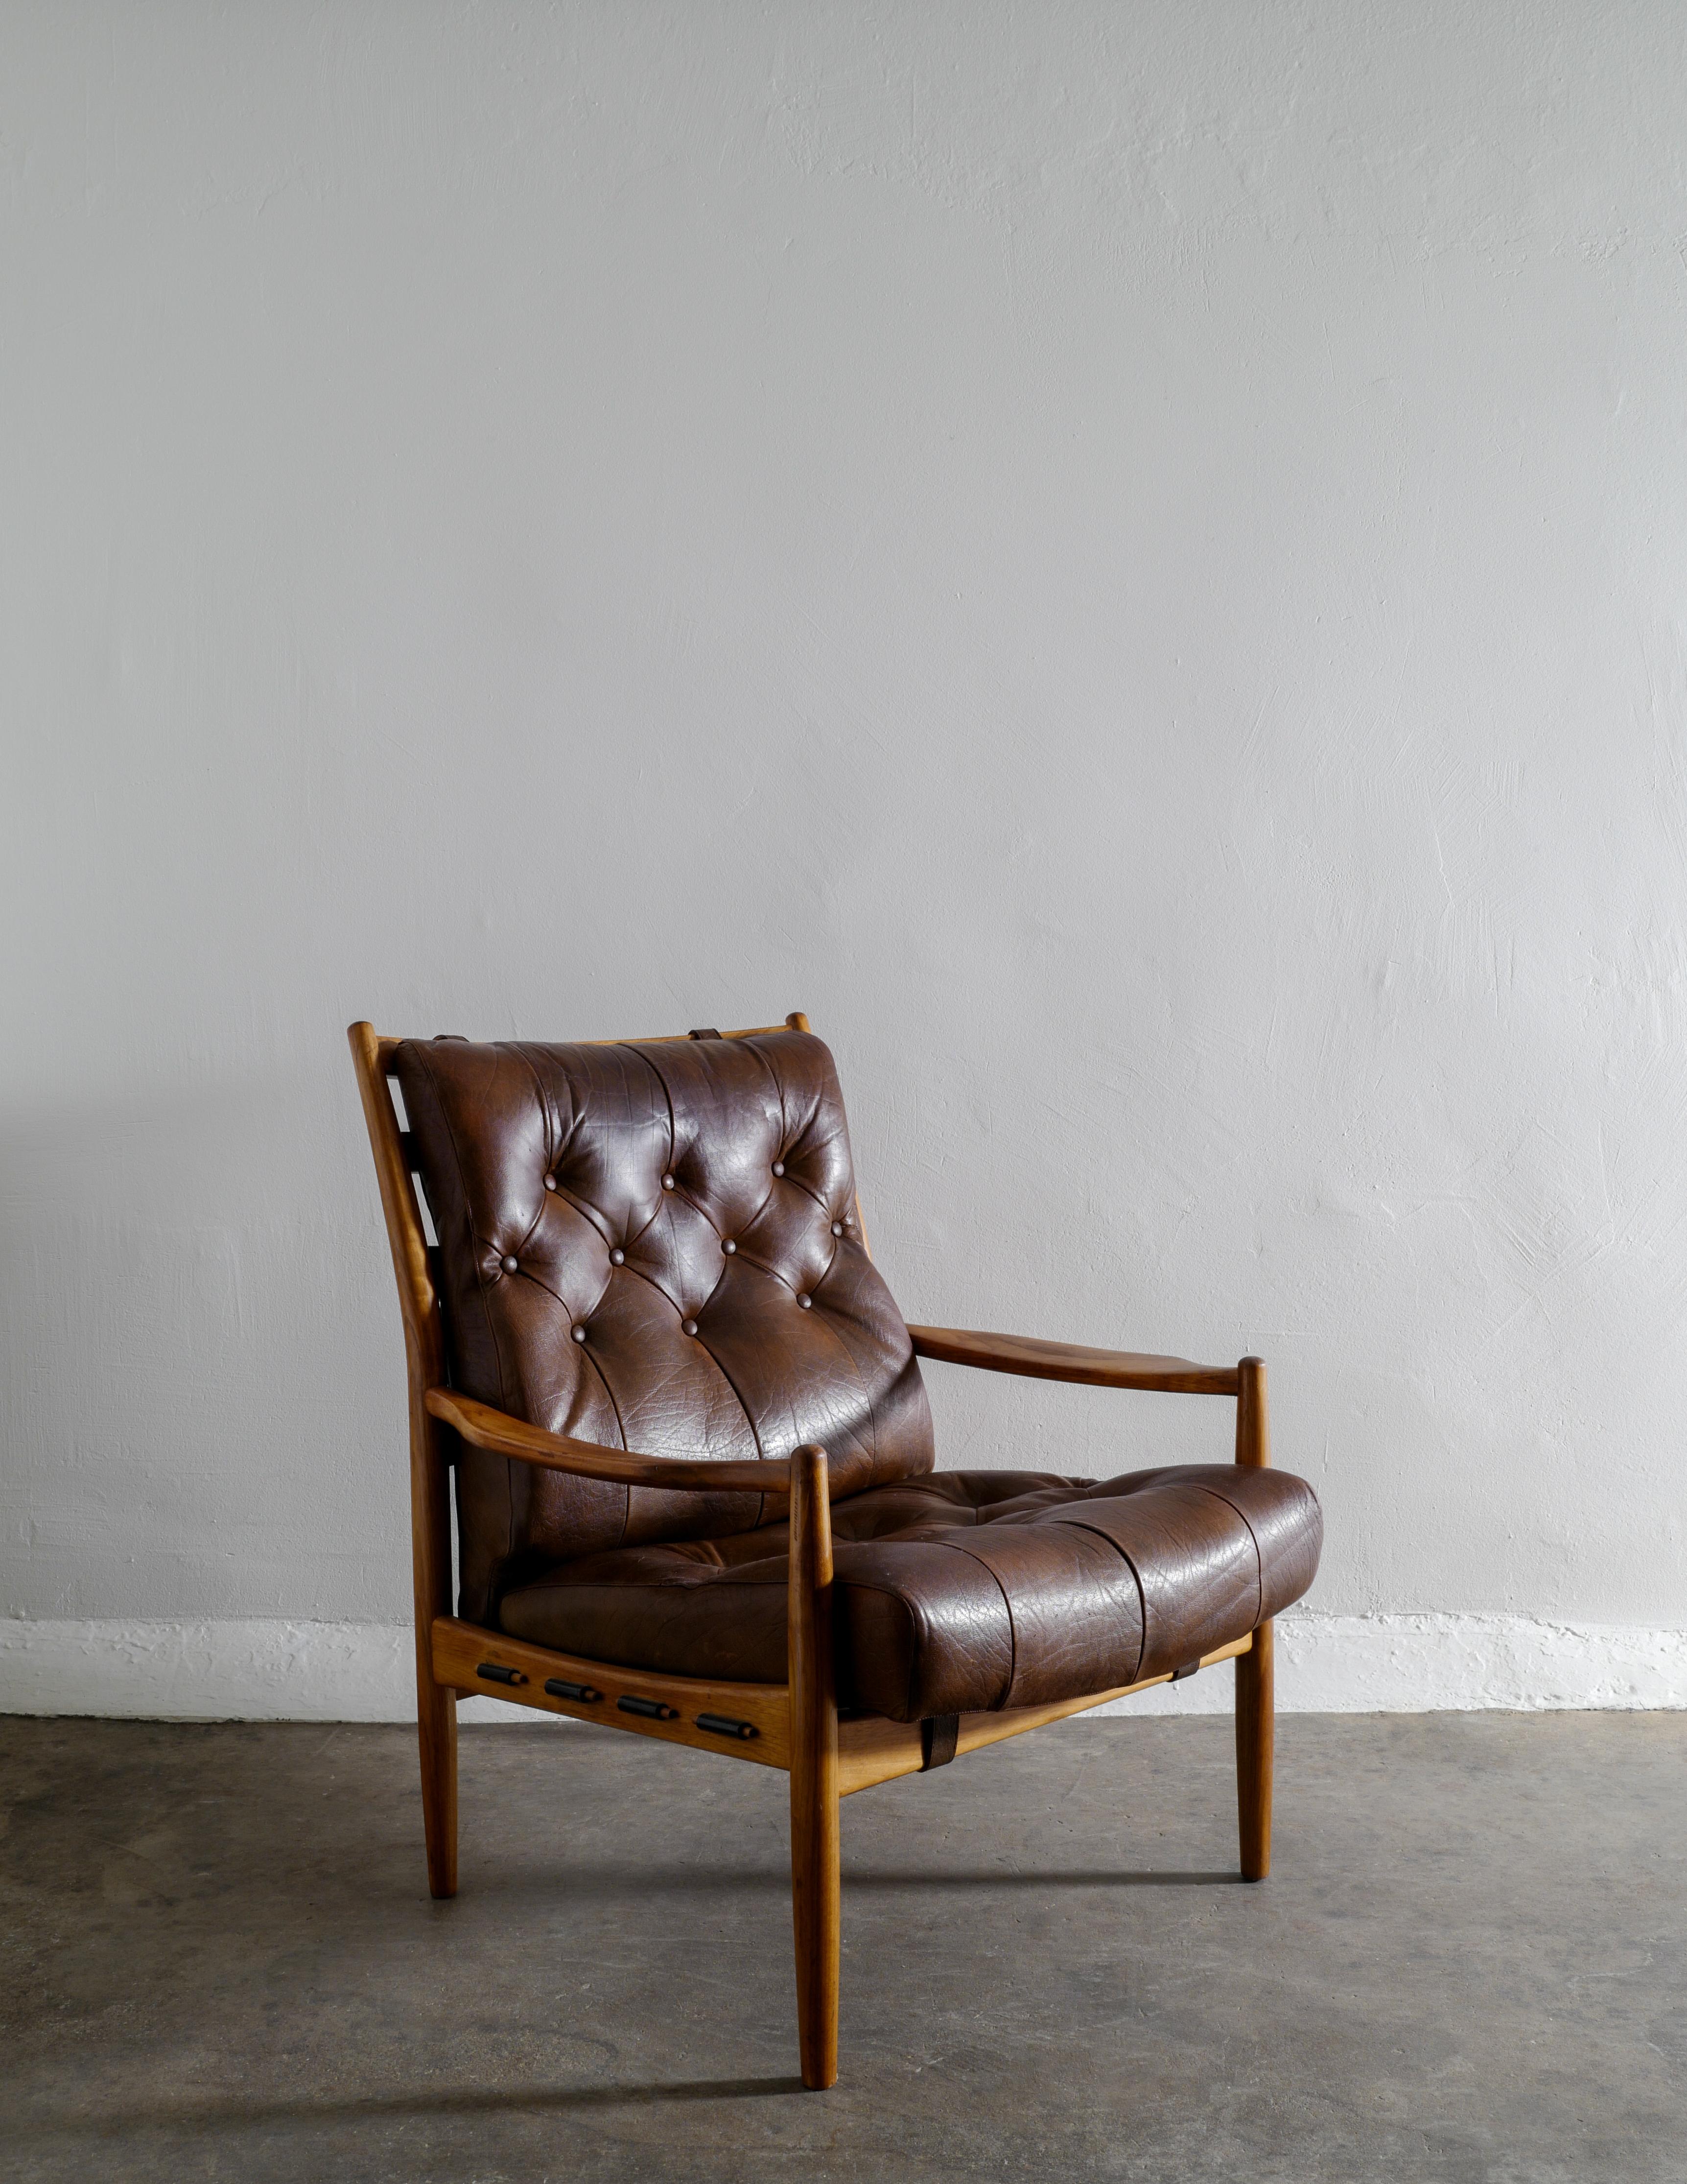 Rare armchair in buffalo leather and walnut designed by Ingemar Thillmark and produced by 